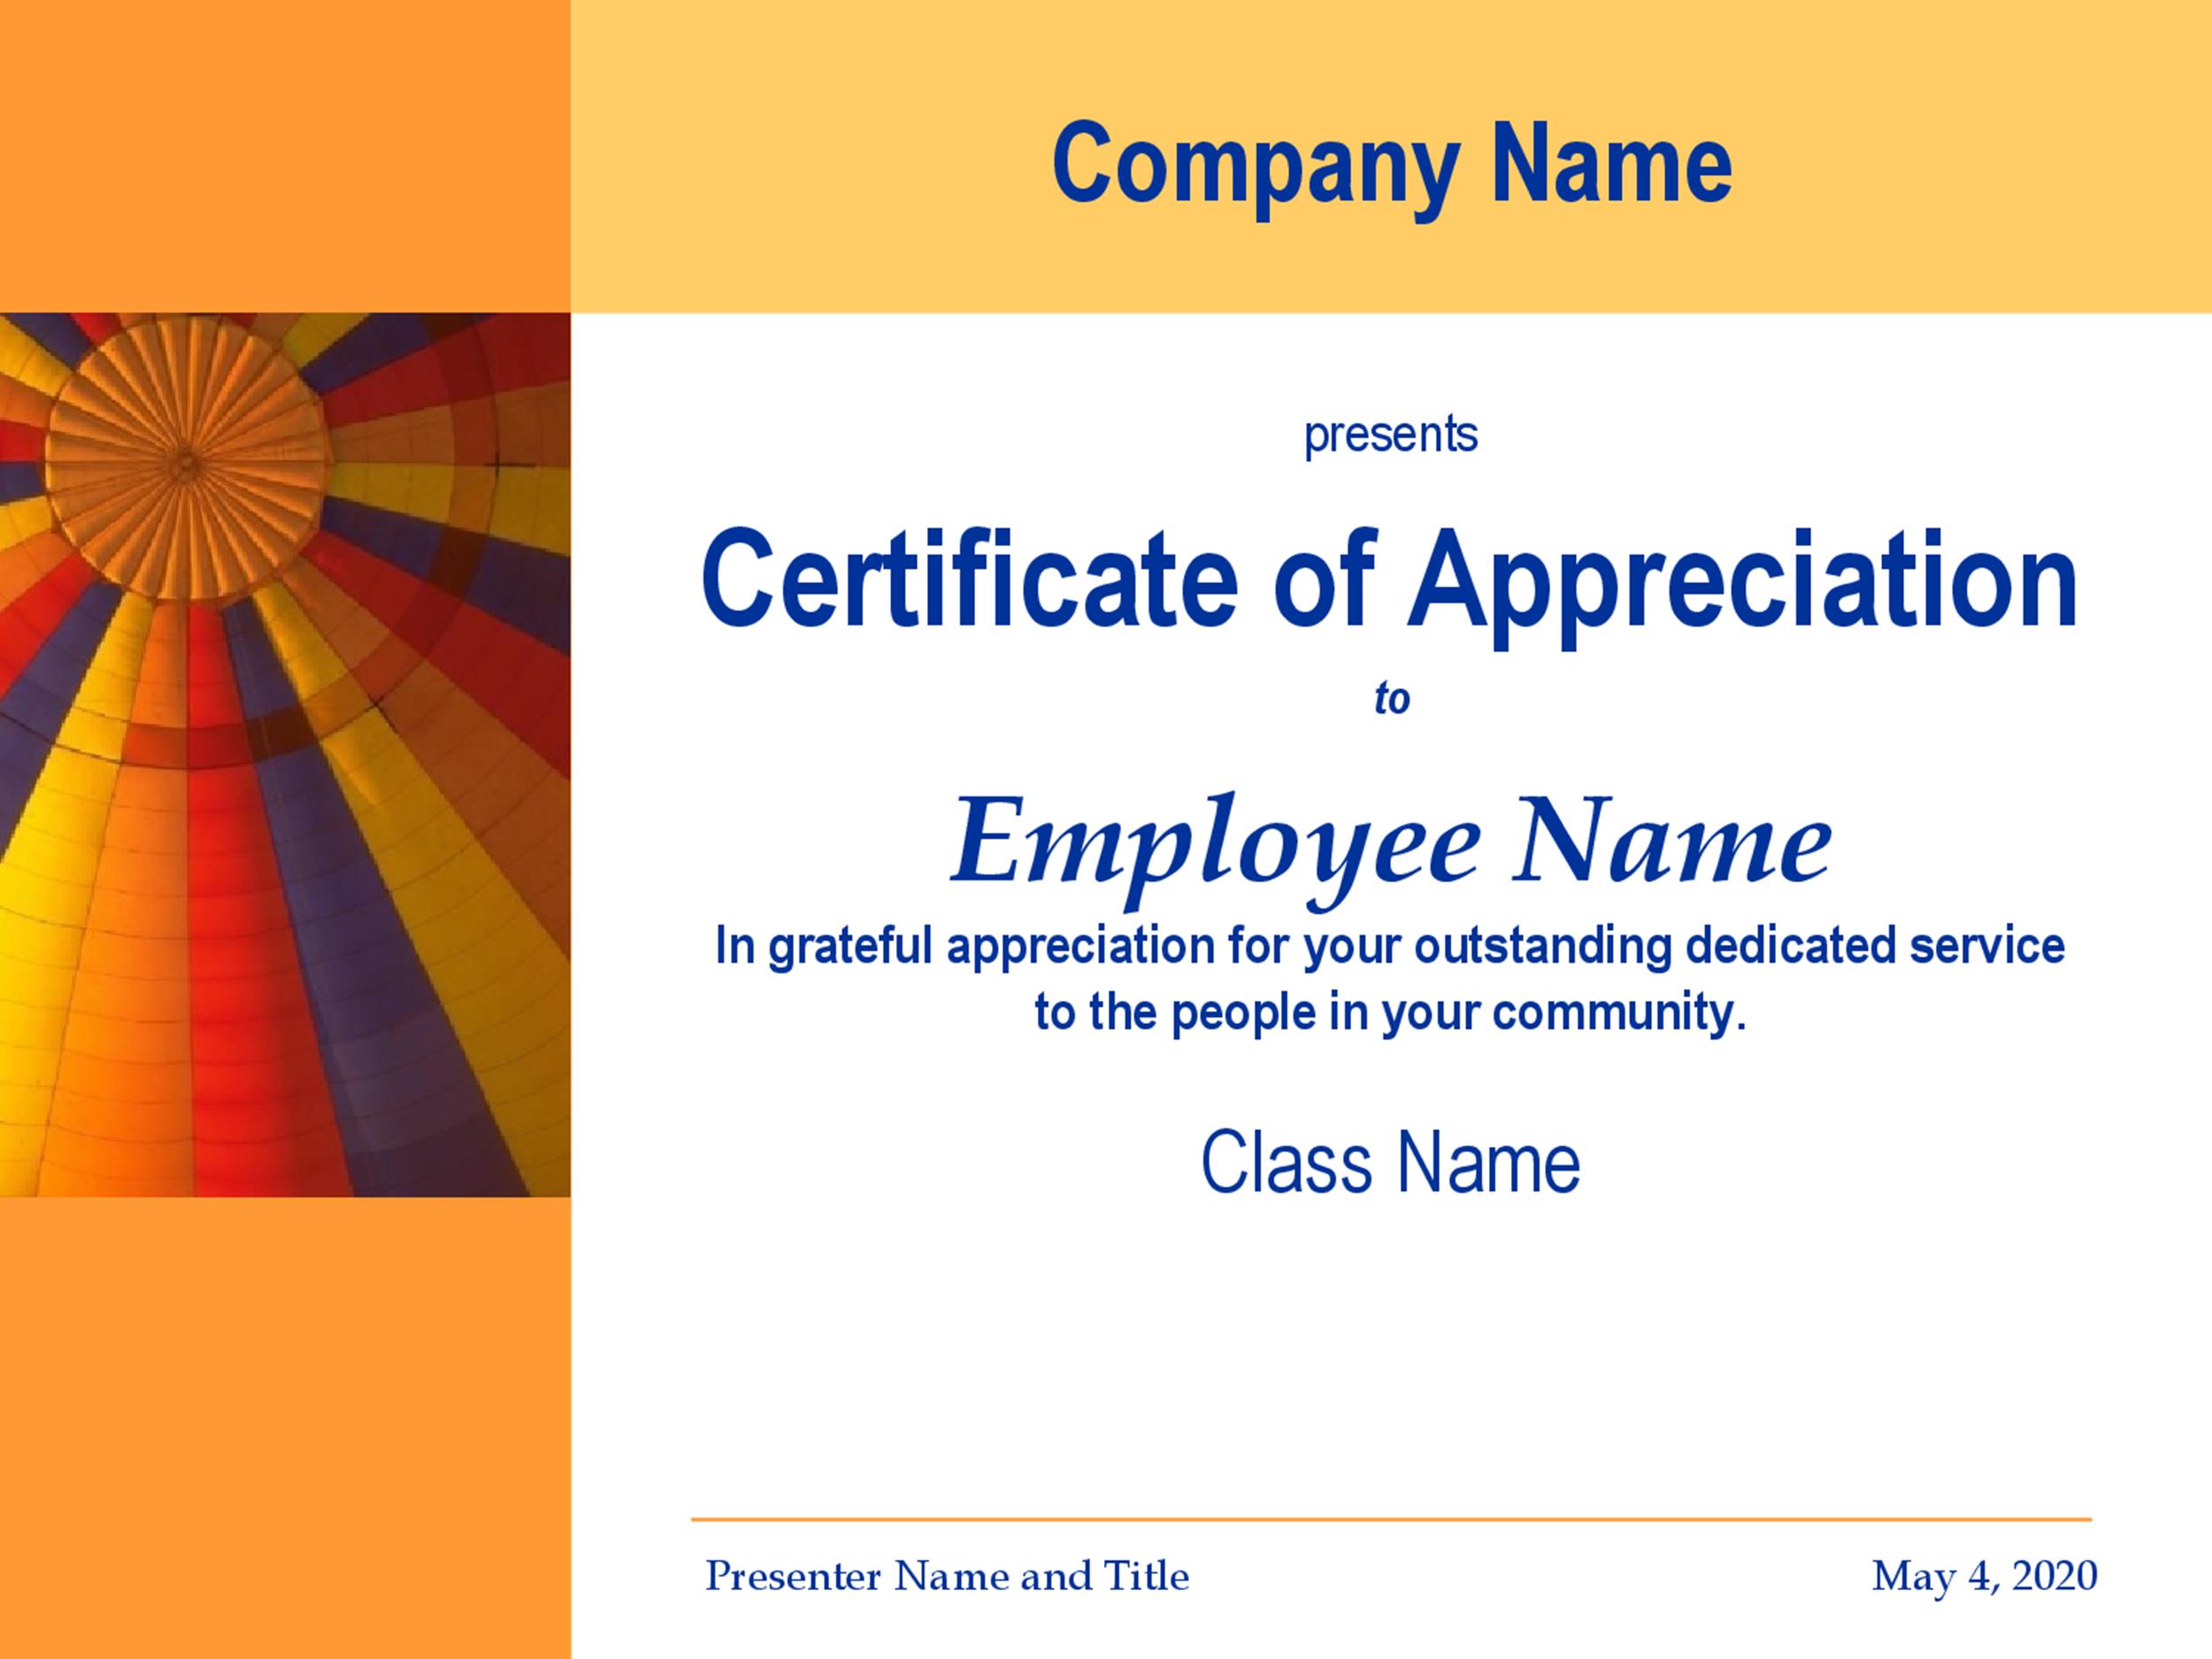 30-free-certificate-of-appreciation-templates-and-letters